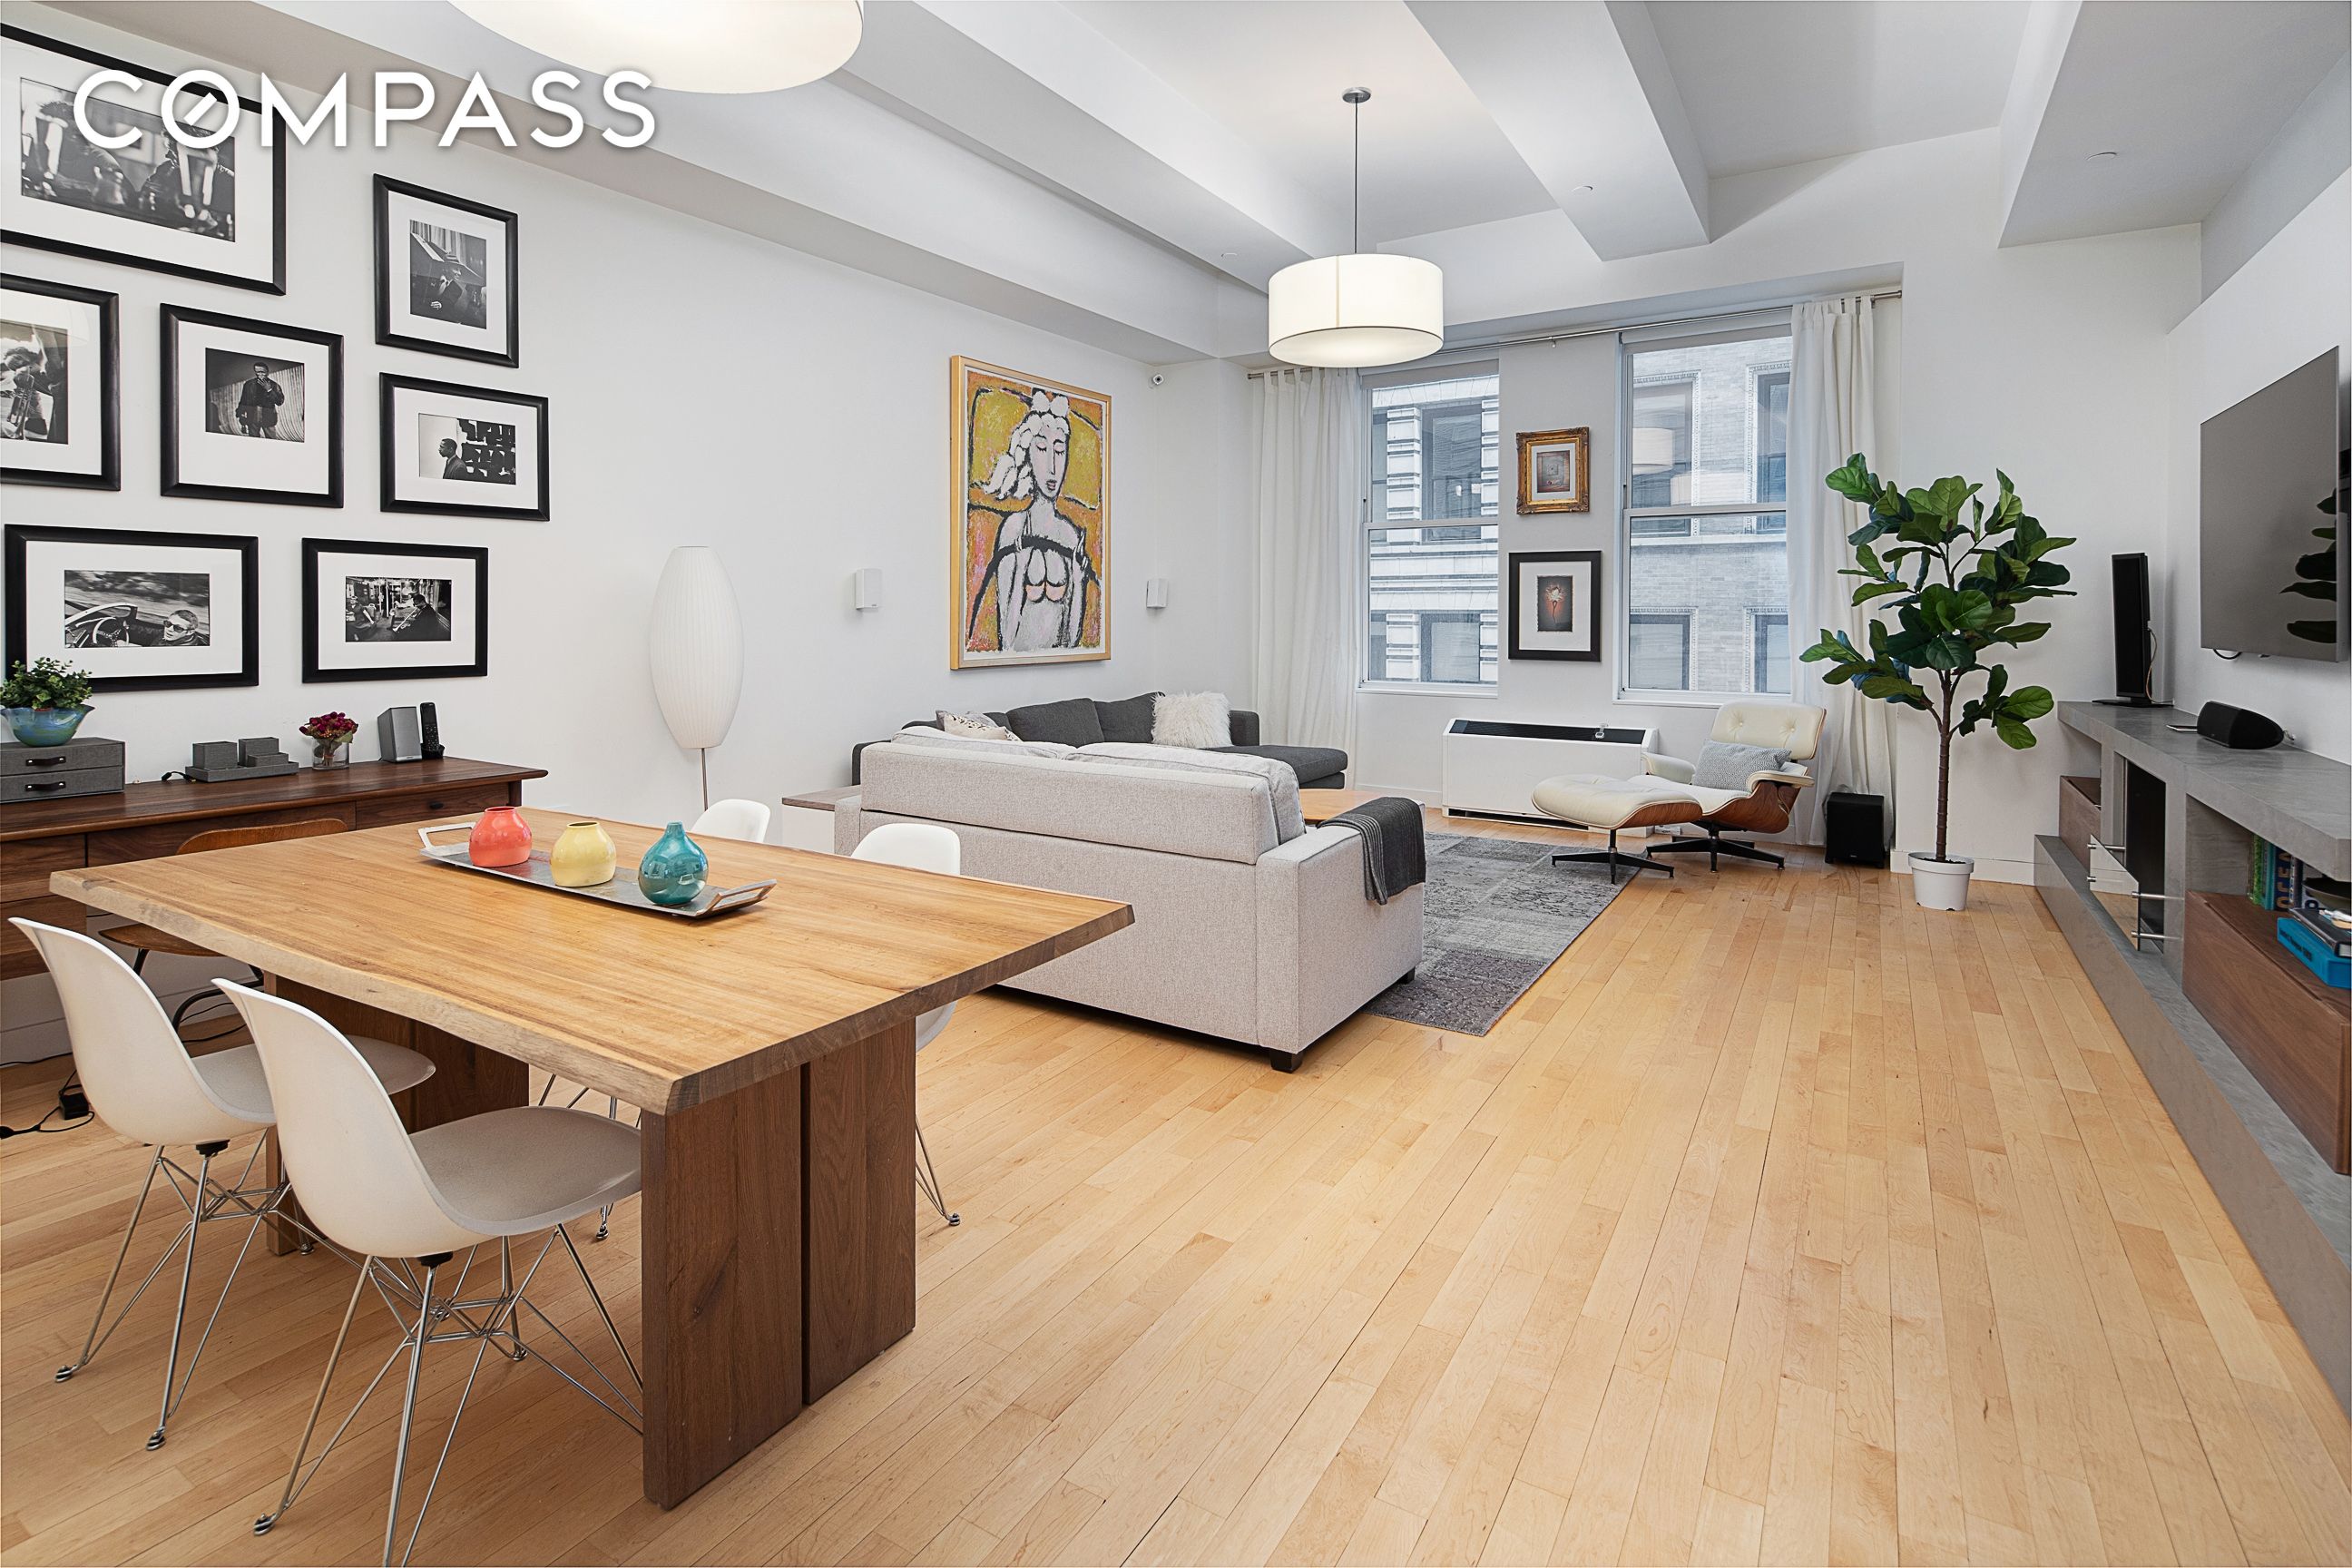 15 Broad Street 830, Financial District, Downtown, NYC - 2 Bedrooms  
2 Bathrooms  
4 Rooms - 